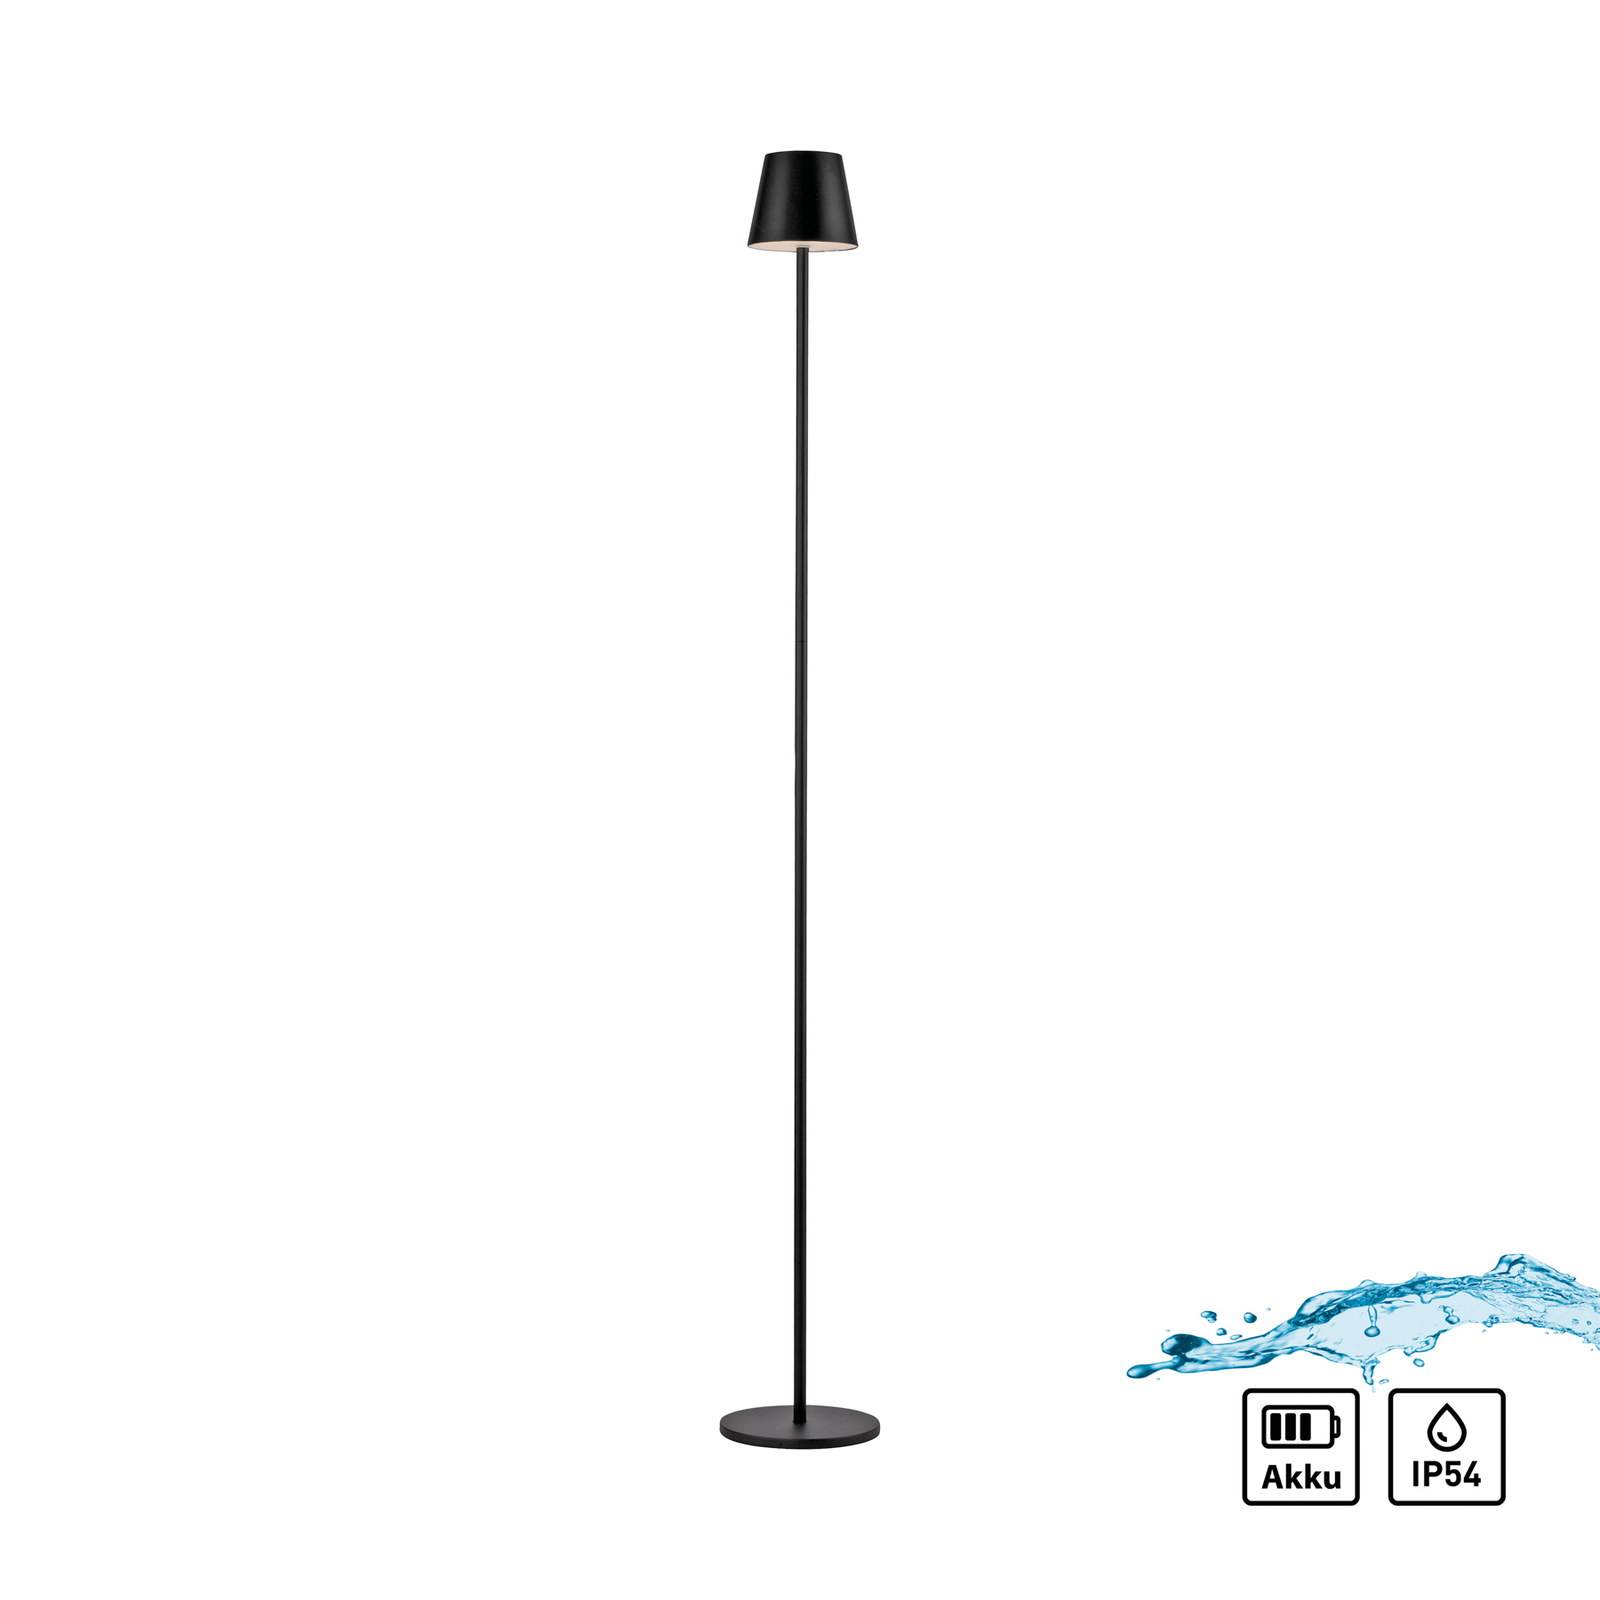 JUST LIGHT. Euria LED floor lamp with rechargeable battery, black, iron,